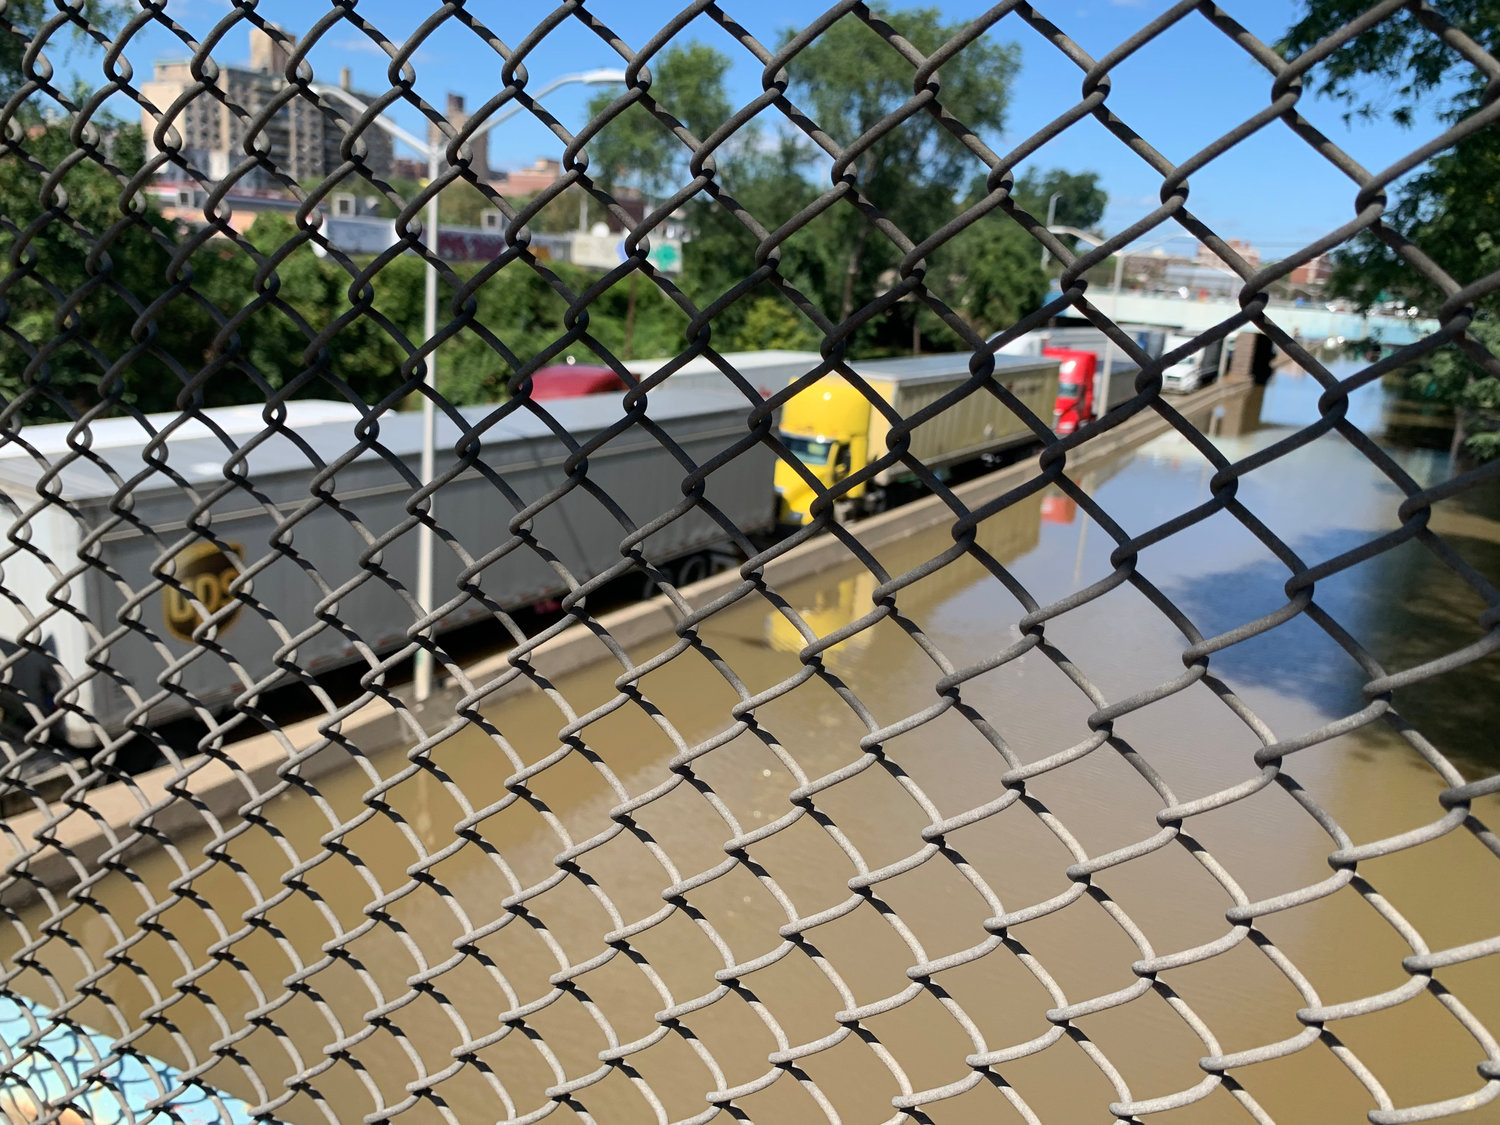 Large sections of the Major Deegan Expressway was shut down through Kingsbridge after massive flooding turned the expressway into river. Cars, trucks and even tour buses were abandoned along the way.